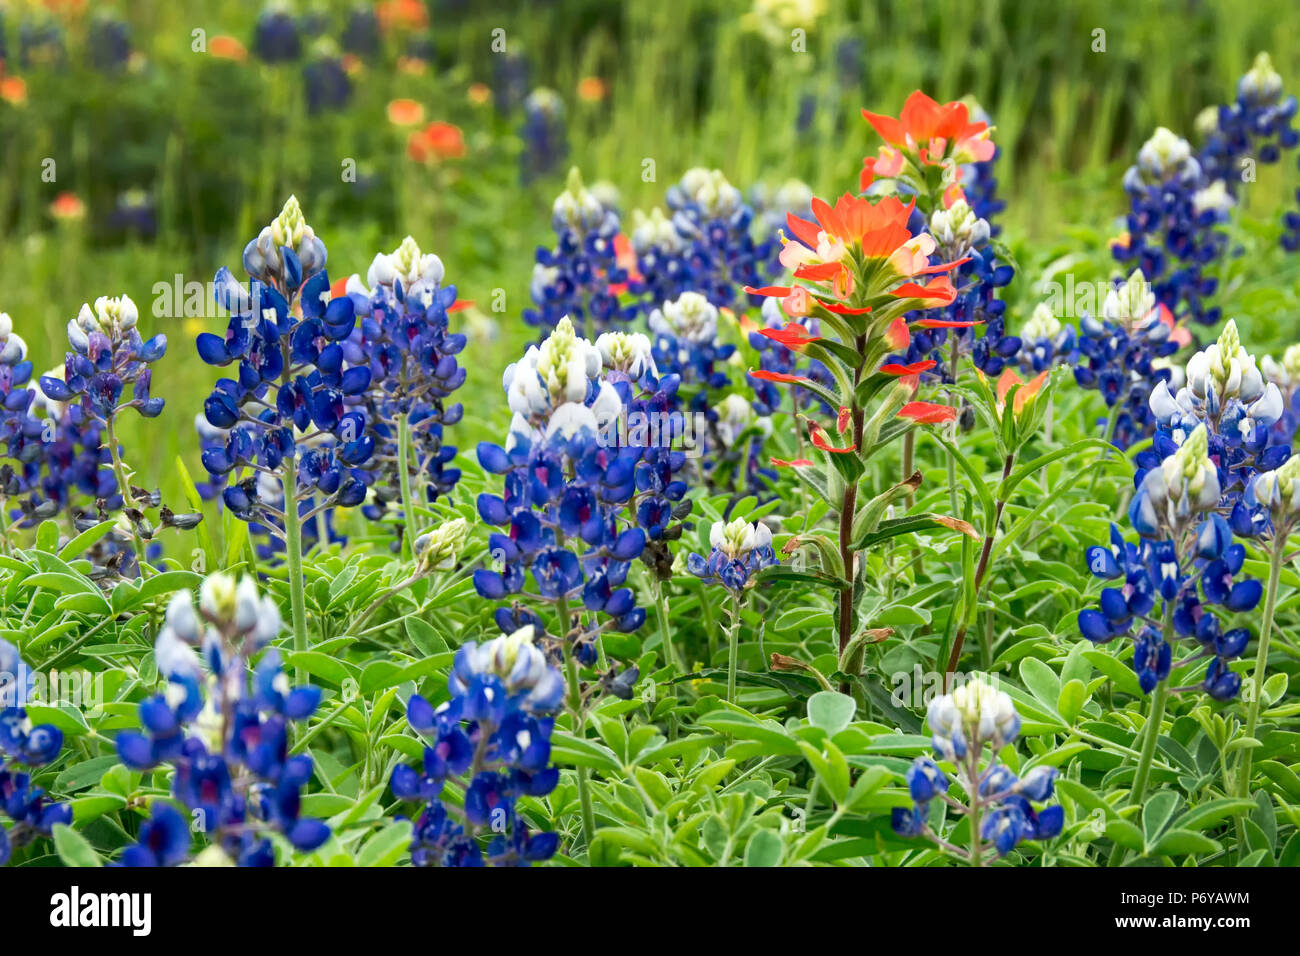 Red Indian Paintbrush in a field of Texas bluebonnets Stock Photo